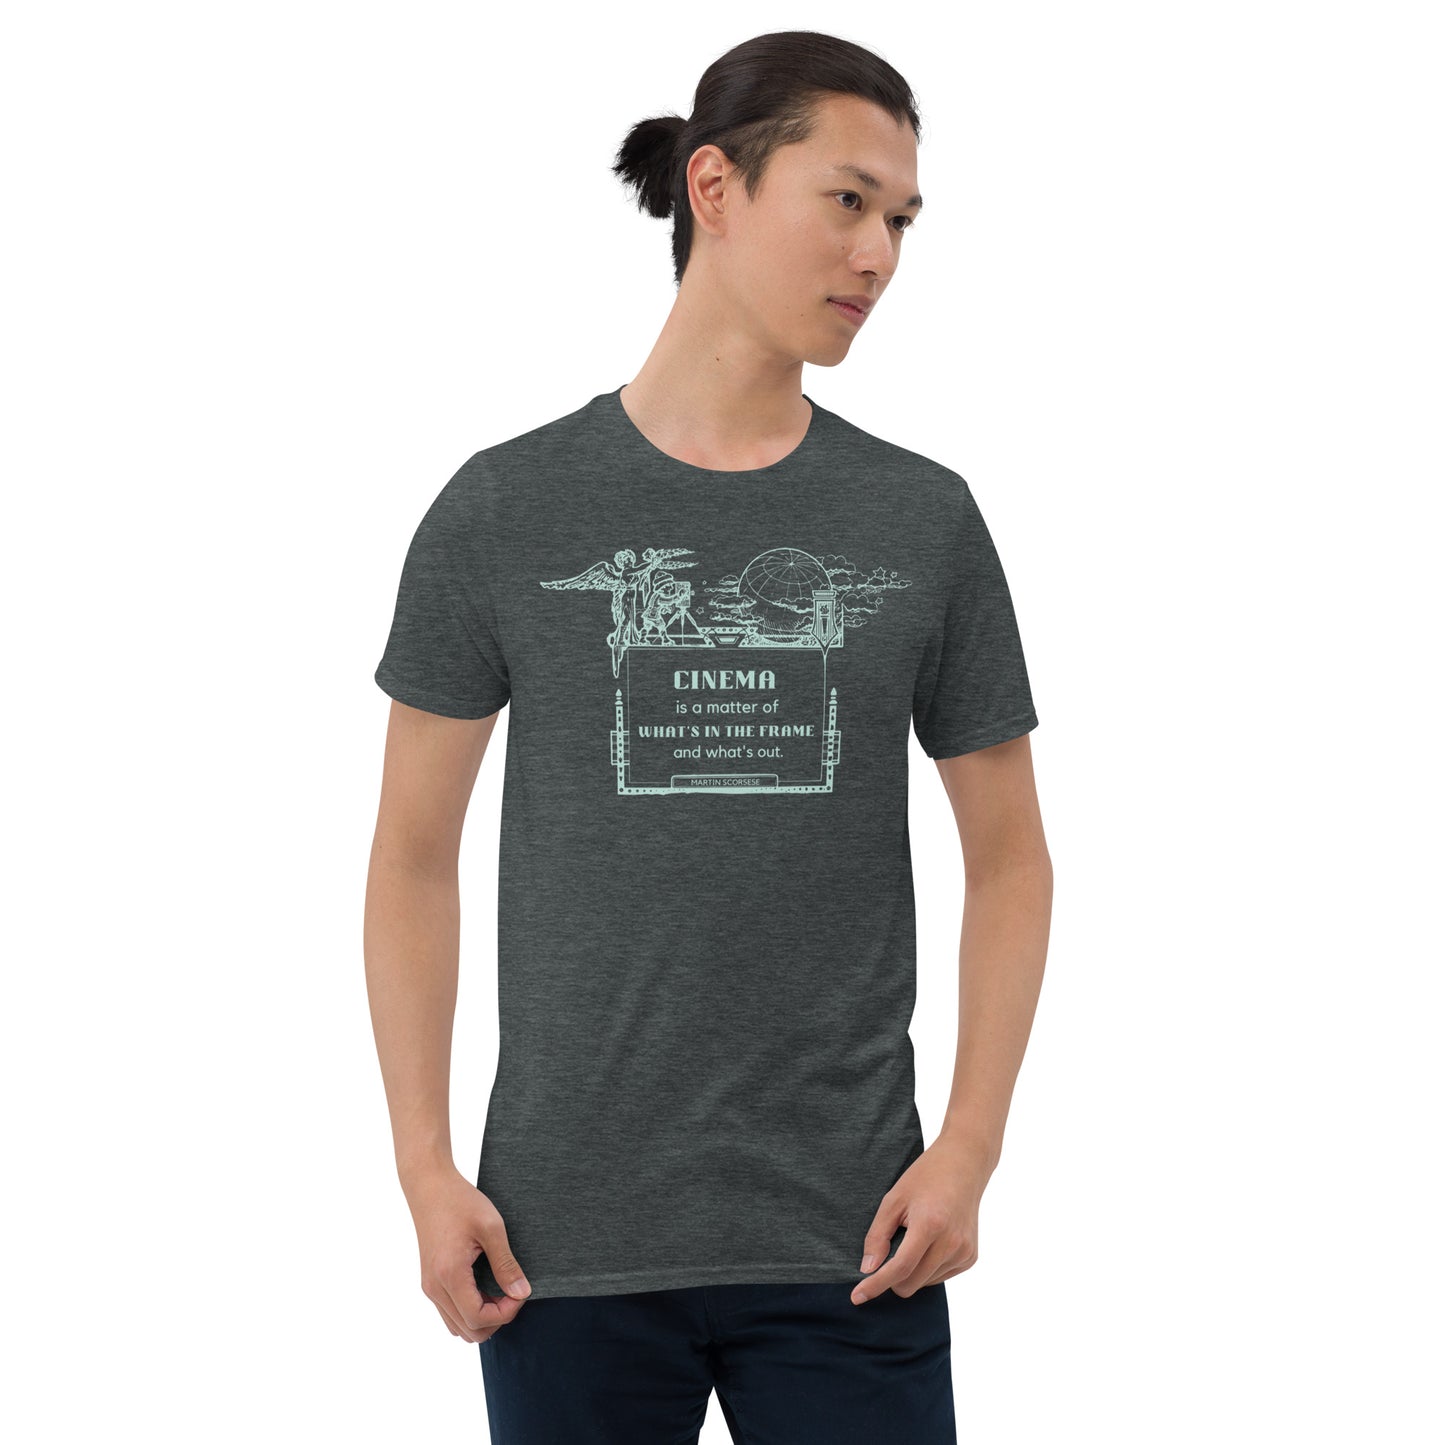 Cinema is a Matter of What's in the Frame and What's Out Short-Sleeve Unisex T-Shirt, Cinema Quote